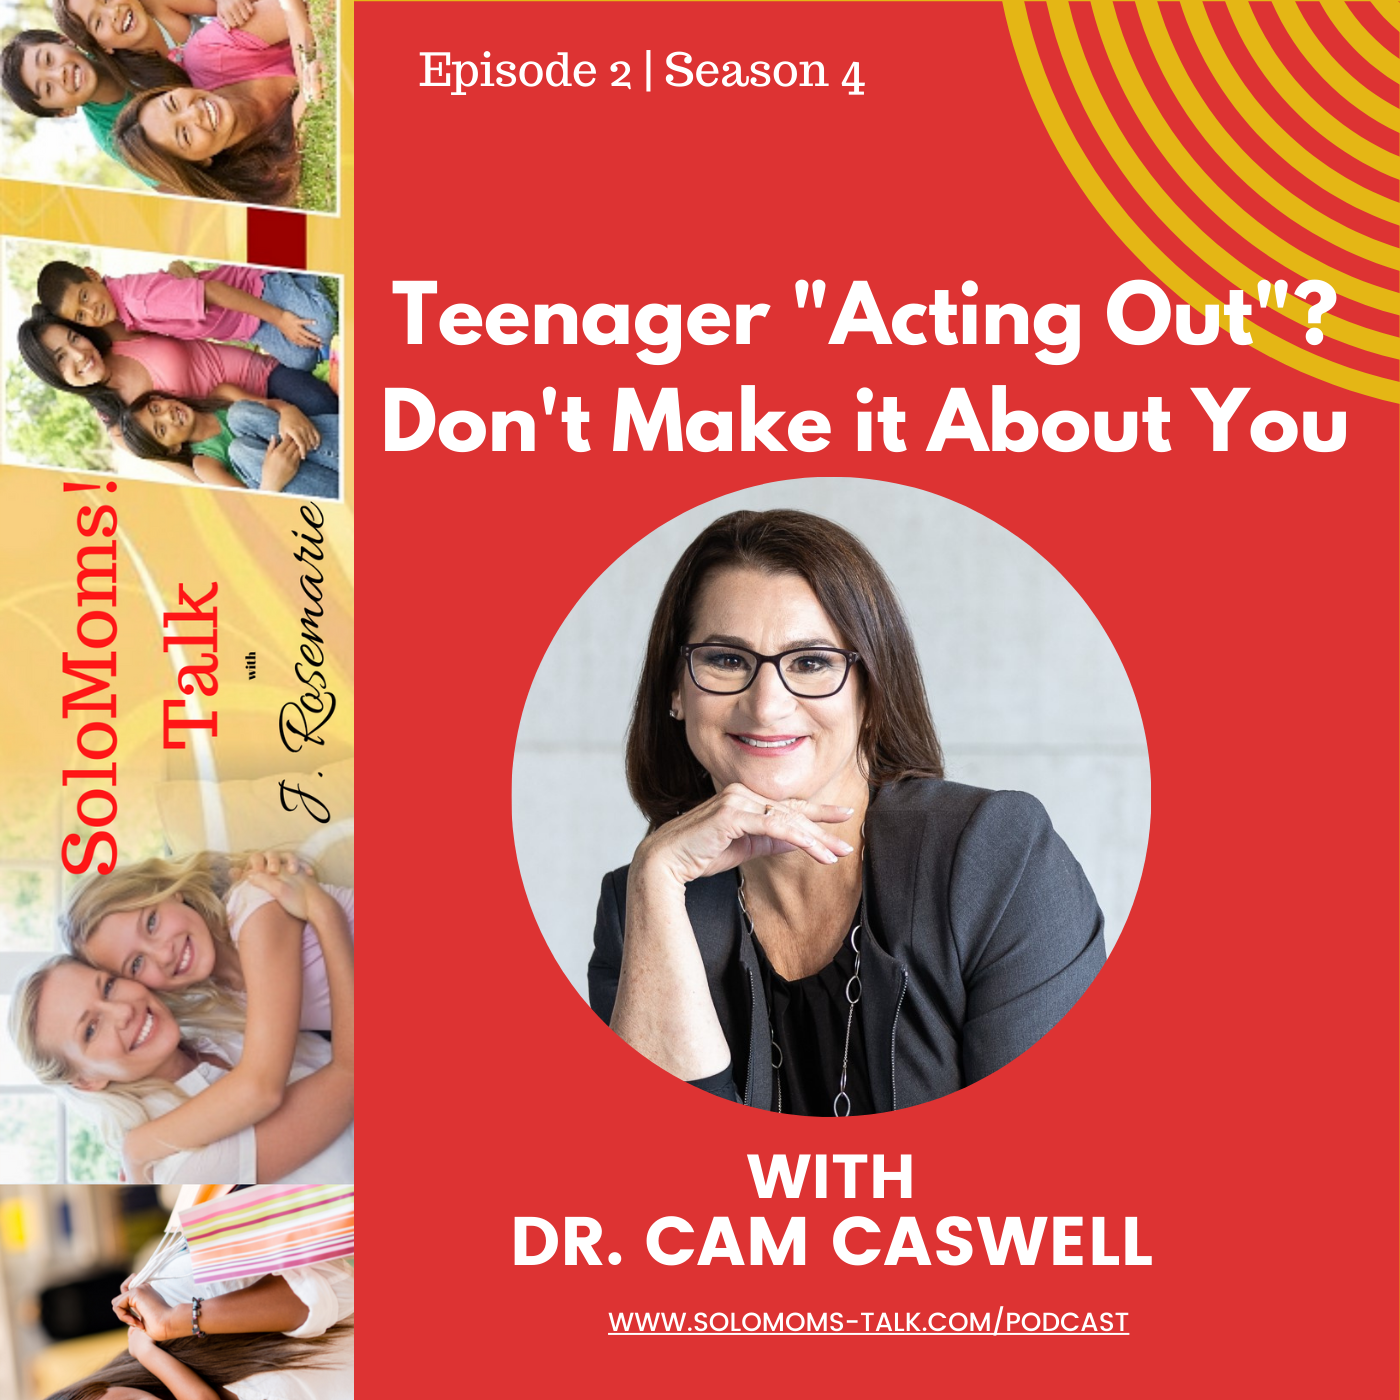 When Your Teen "Act Out", Don't Make it About You - Dr. Cam Caswell